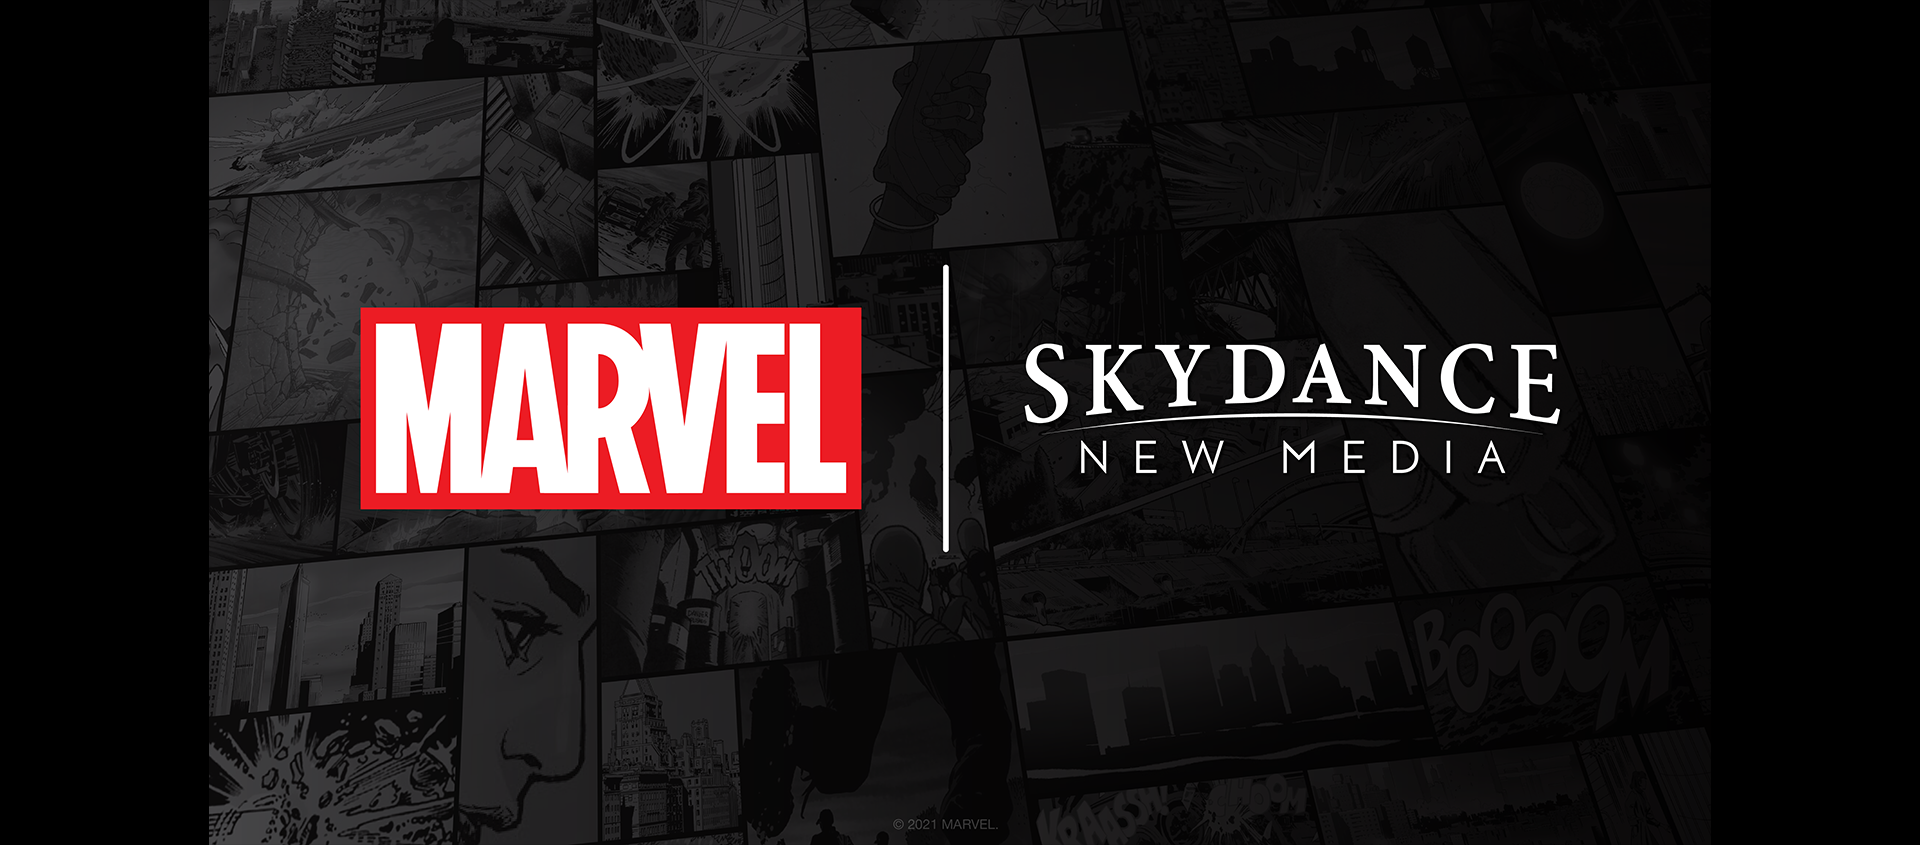 Image for Uncharted's Amy Hennig working on a new Marvel title at Skydance New Media